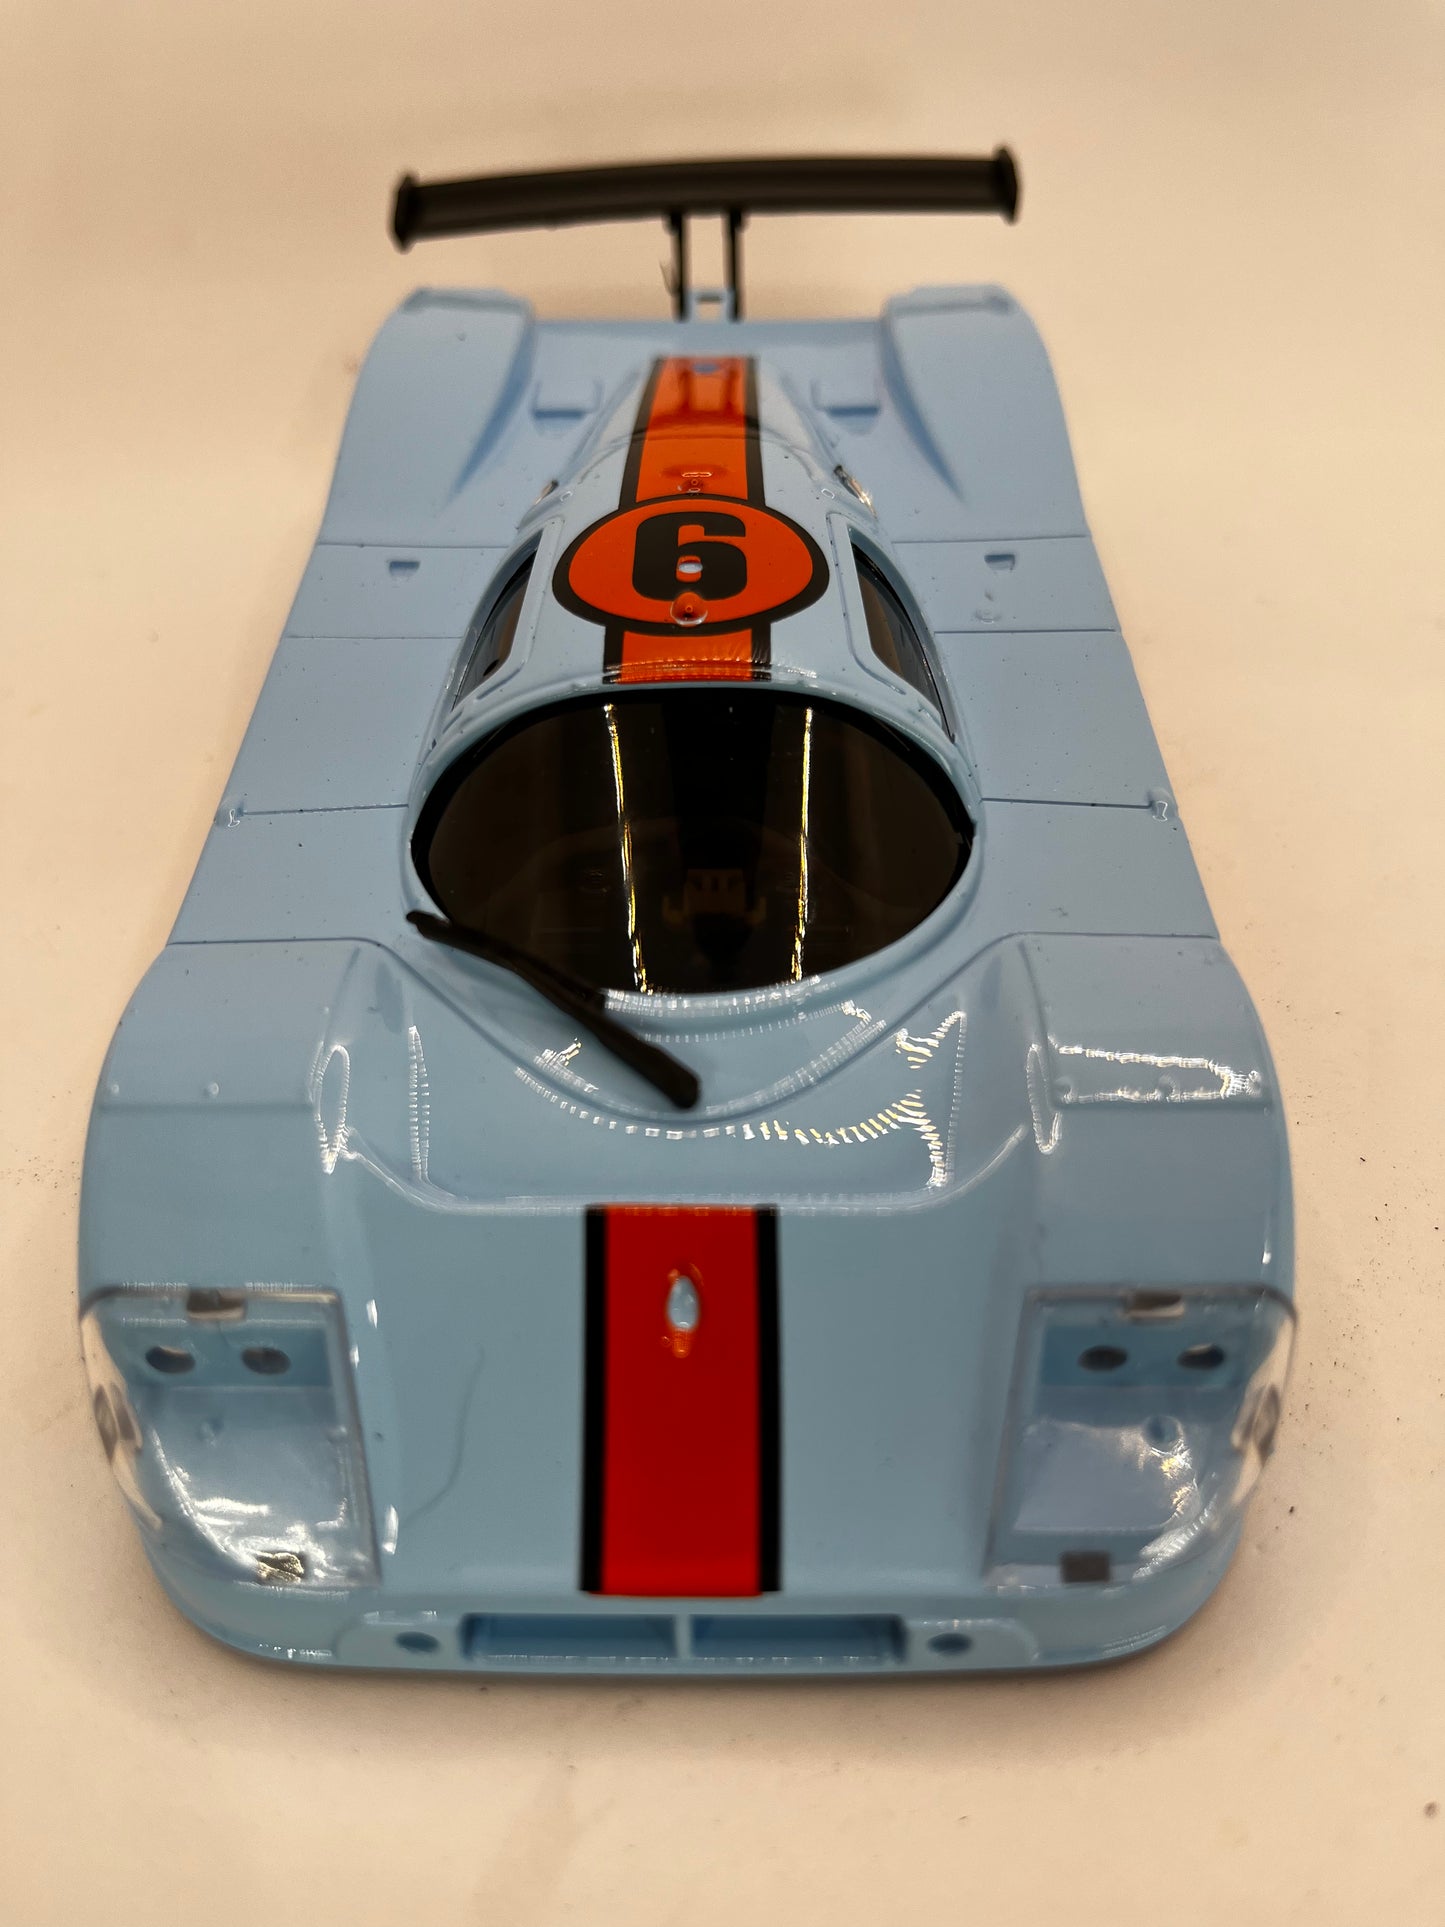 Silver Horse RC Sauber C9 LM 102mm - Gulf Livery